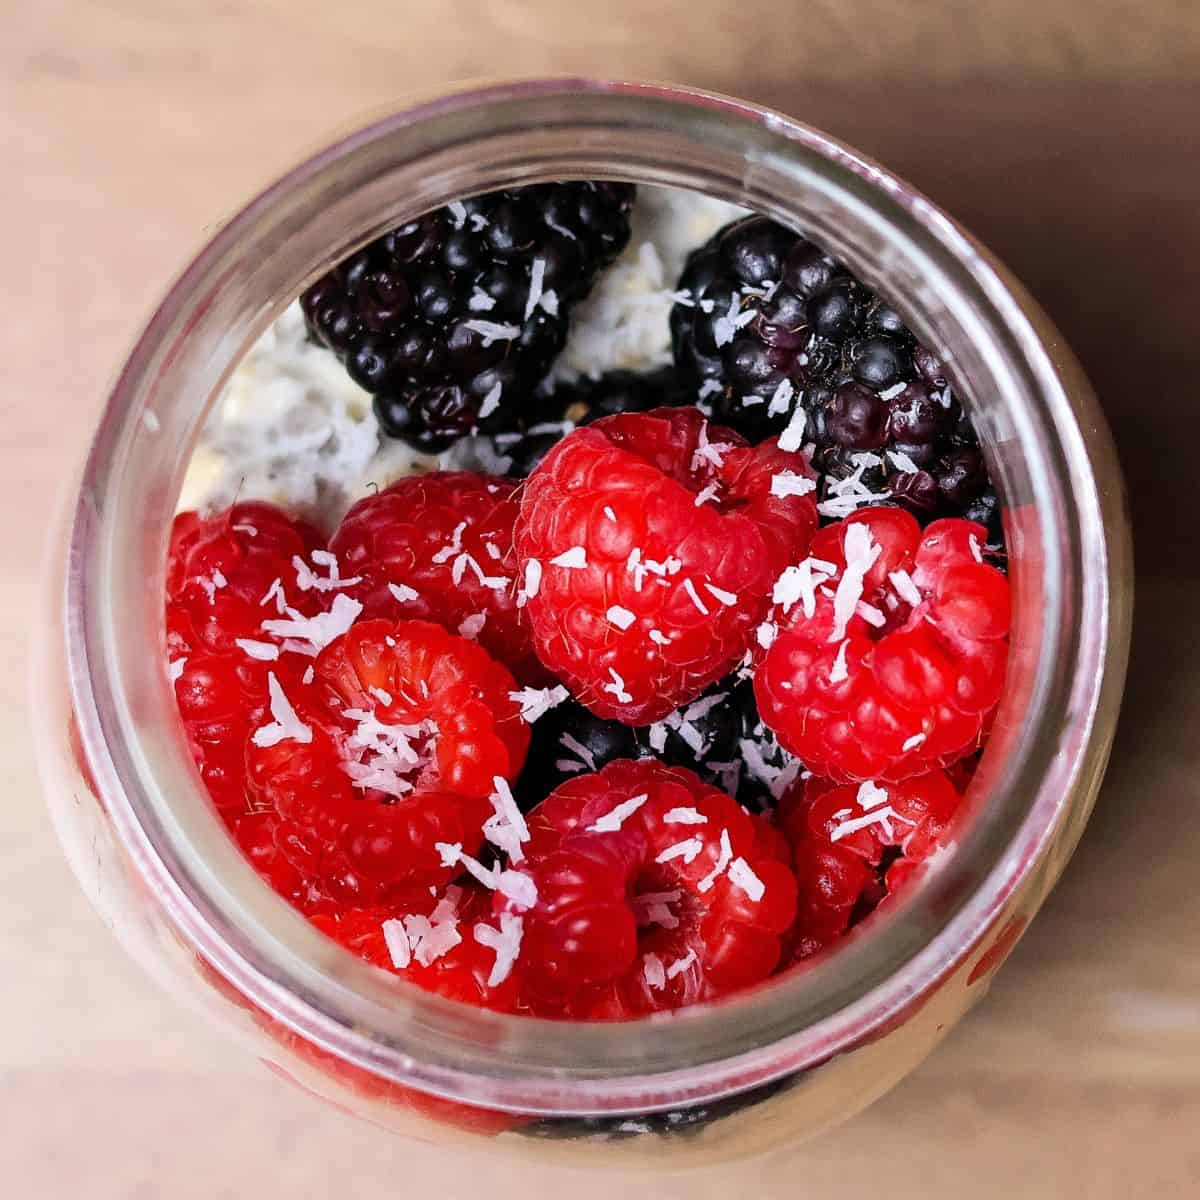 Top view of a mason jar with overnight oats, showcasing a vibrant layer of blackberries, raspberries, and a sprinkle of coconut shreds on top.